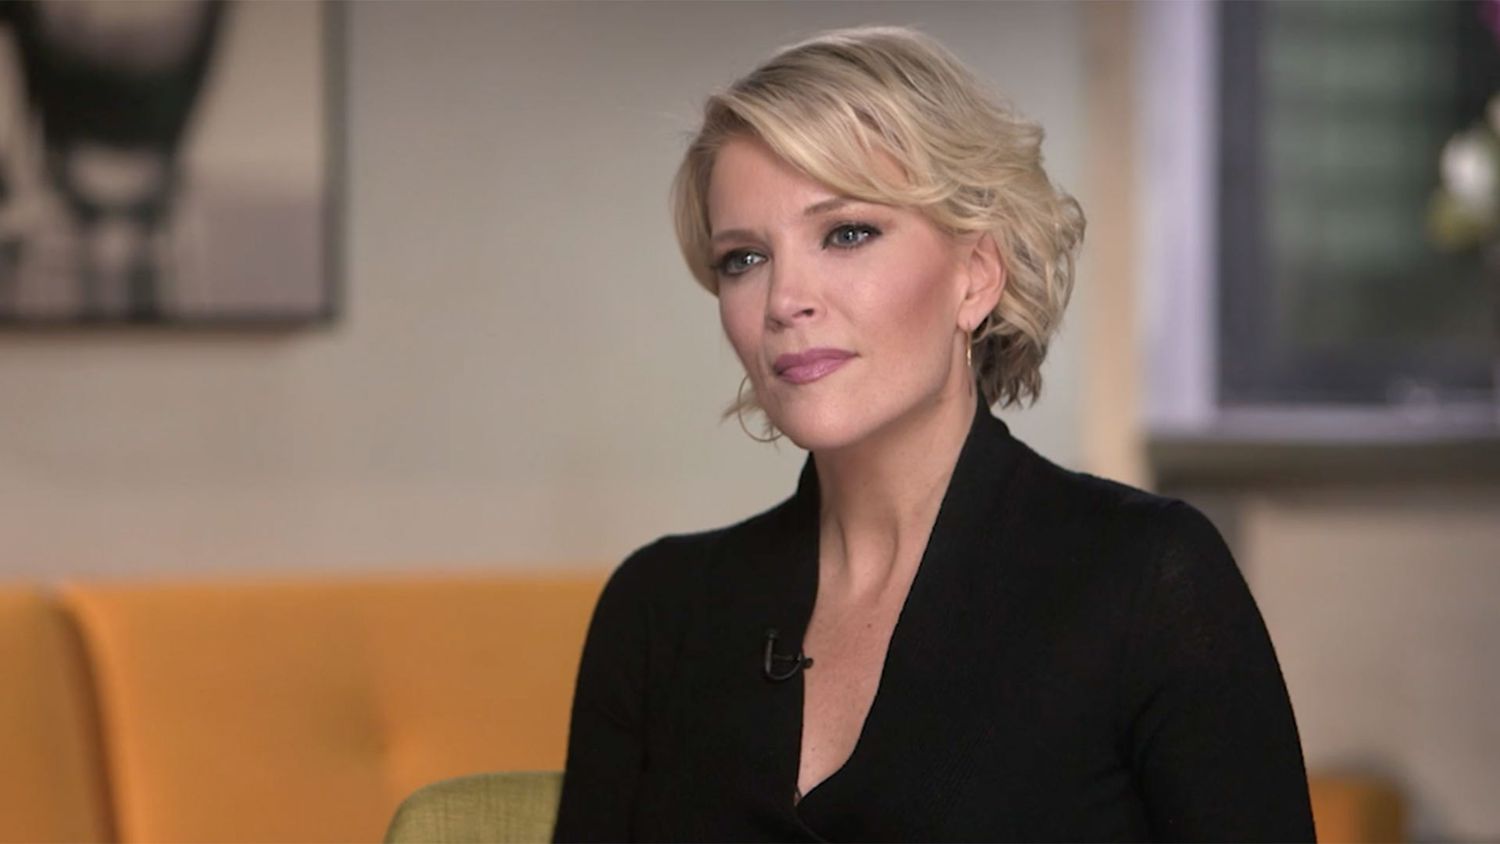 Megan Kelly on What Bombshell Got Wrong